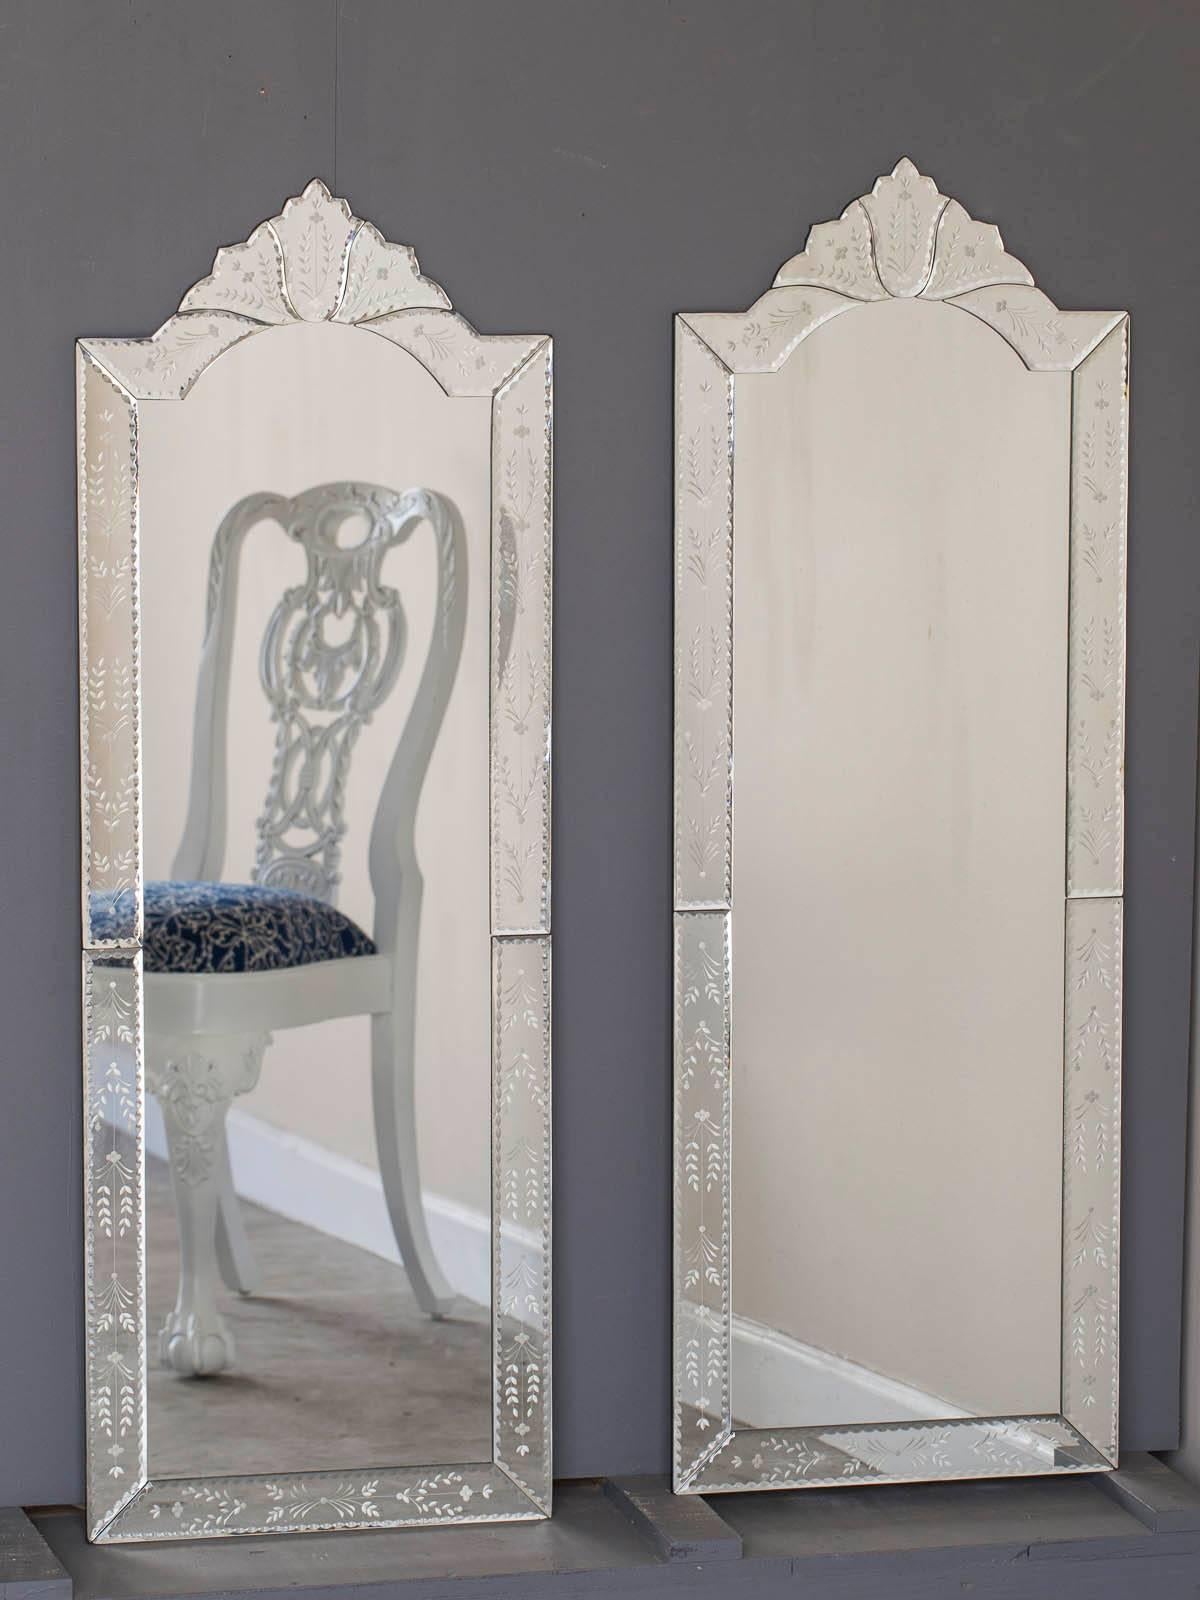 Tall and slender and just like the girl from Ipanema this pair of modern Venetian glass mirrors has a narrow width compared to the height. Each mirror is composed of ten individually made sections of etched mirror glass surrounding the central